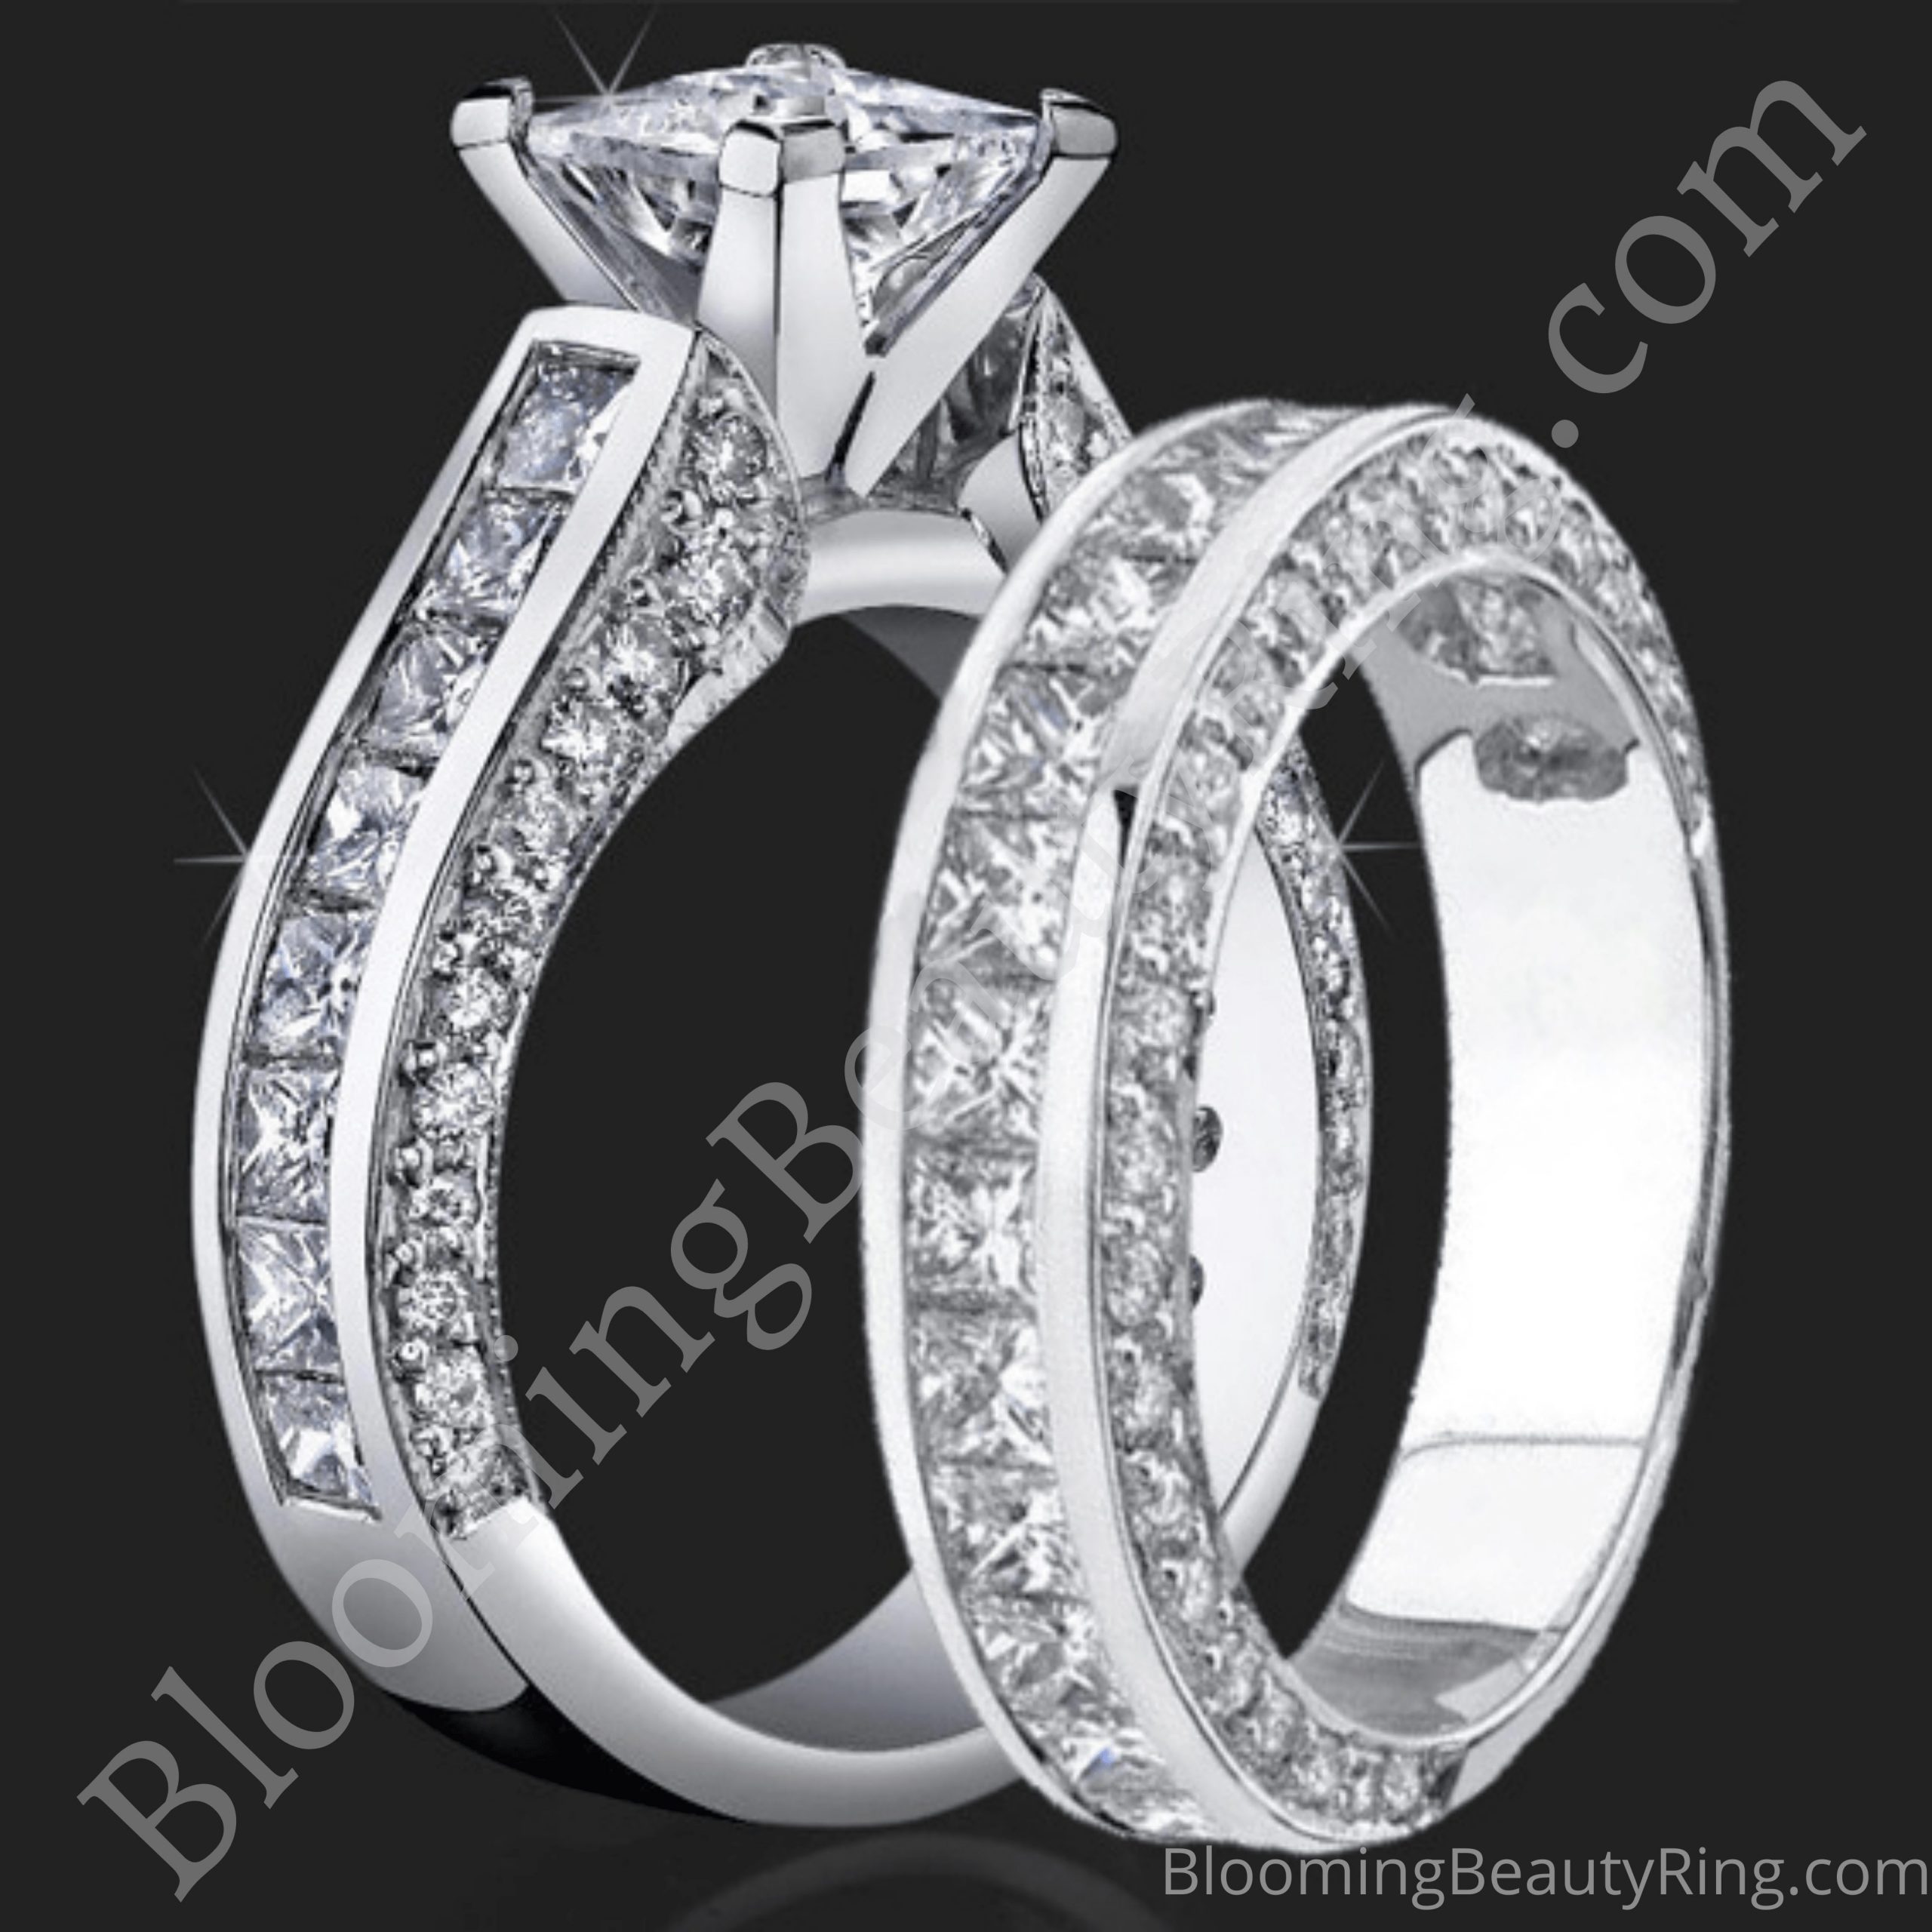 Jewelers Impressive Princess Cut Engagement Rings with Well Over 3 Carats of Diamonds (3.68 ctw)